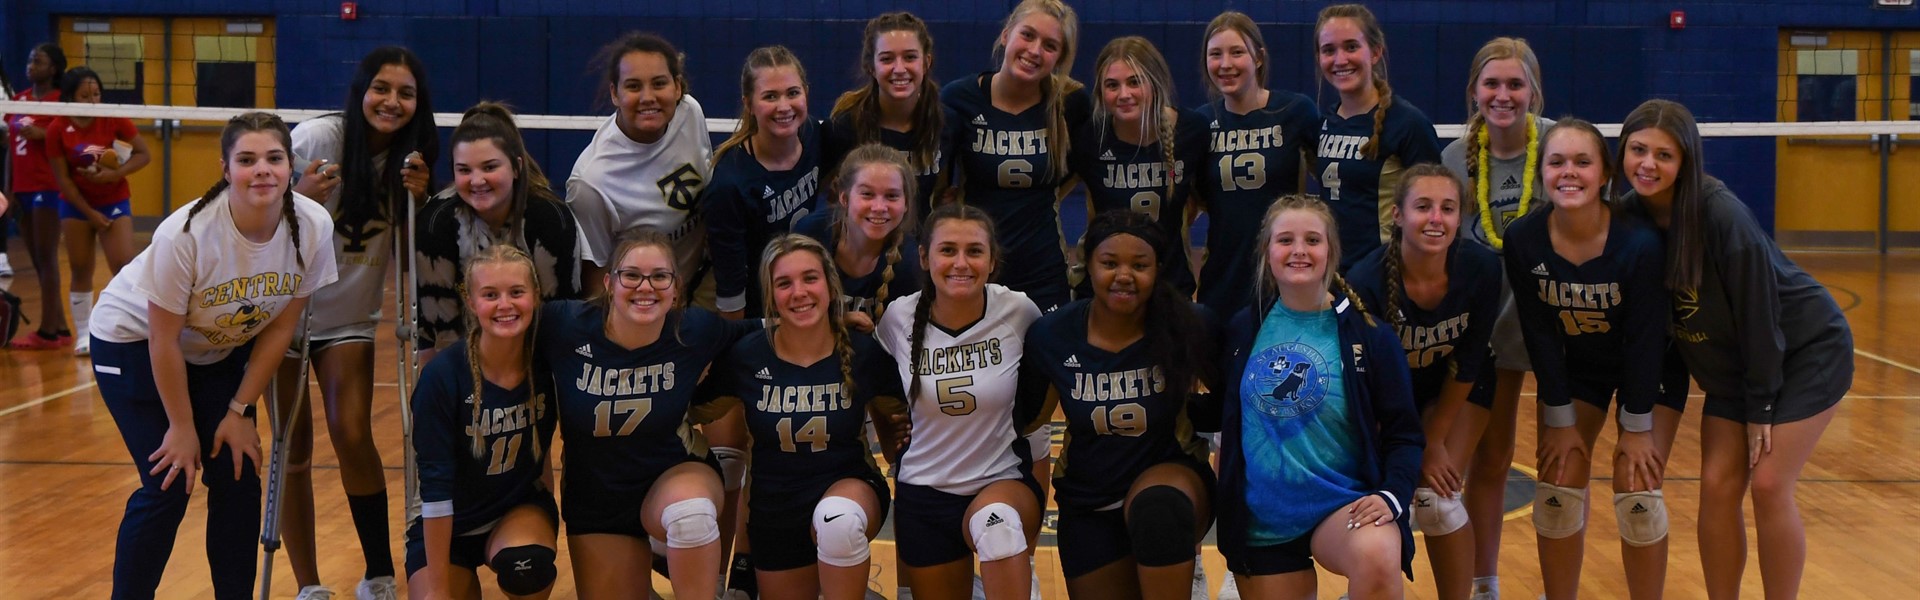 Yellow Jacket volleyball team